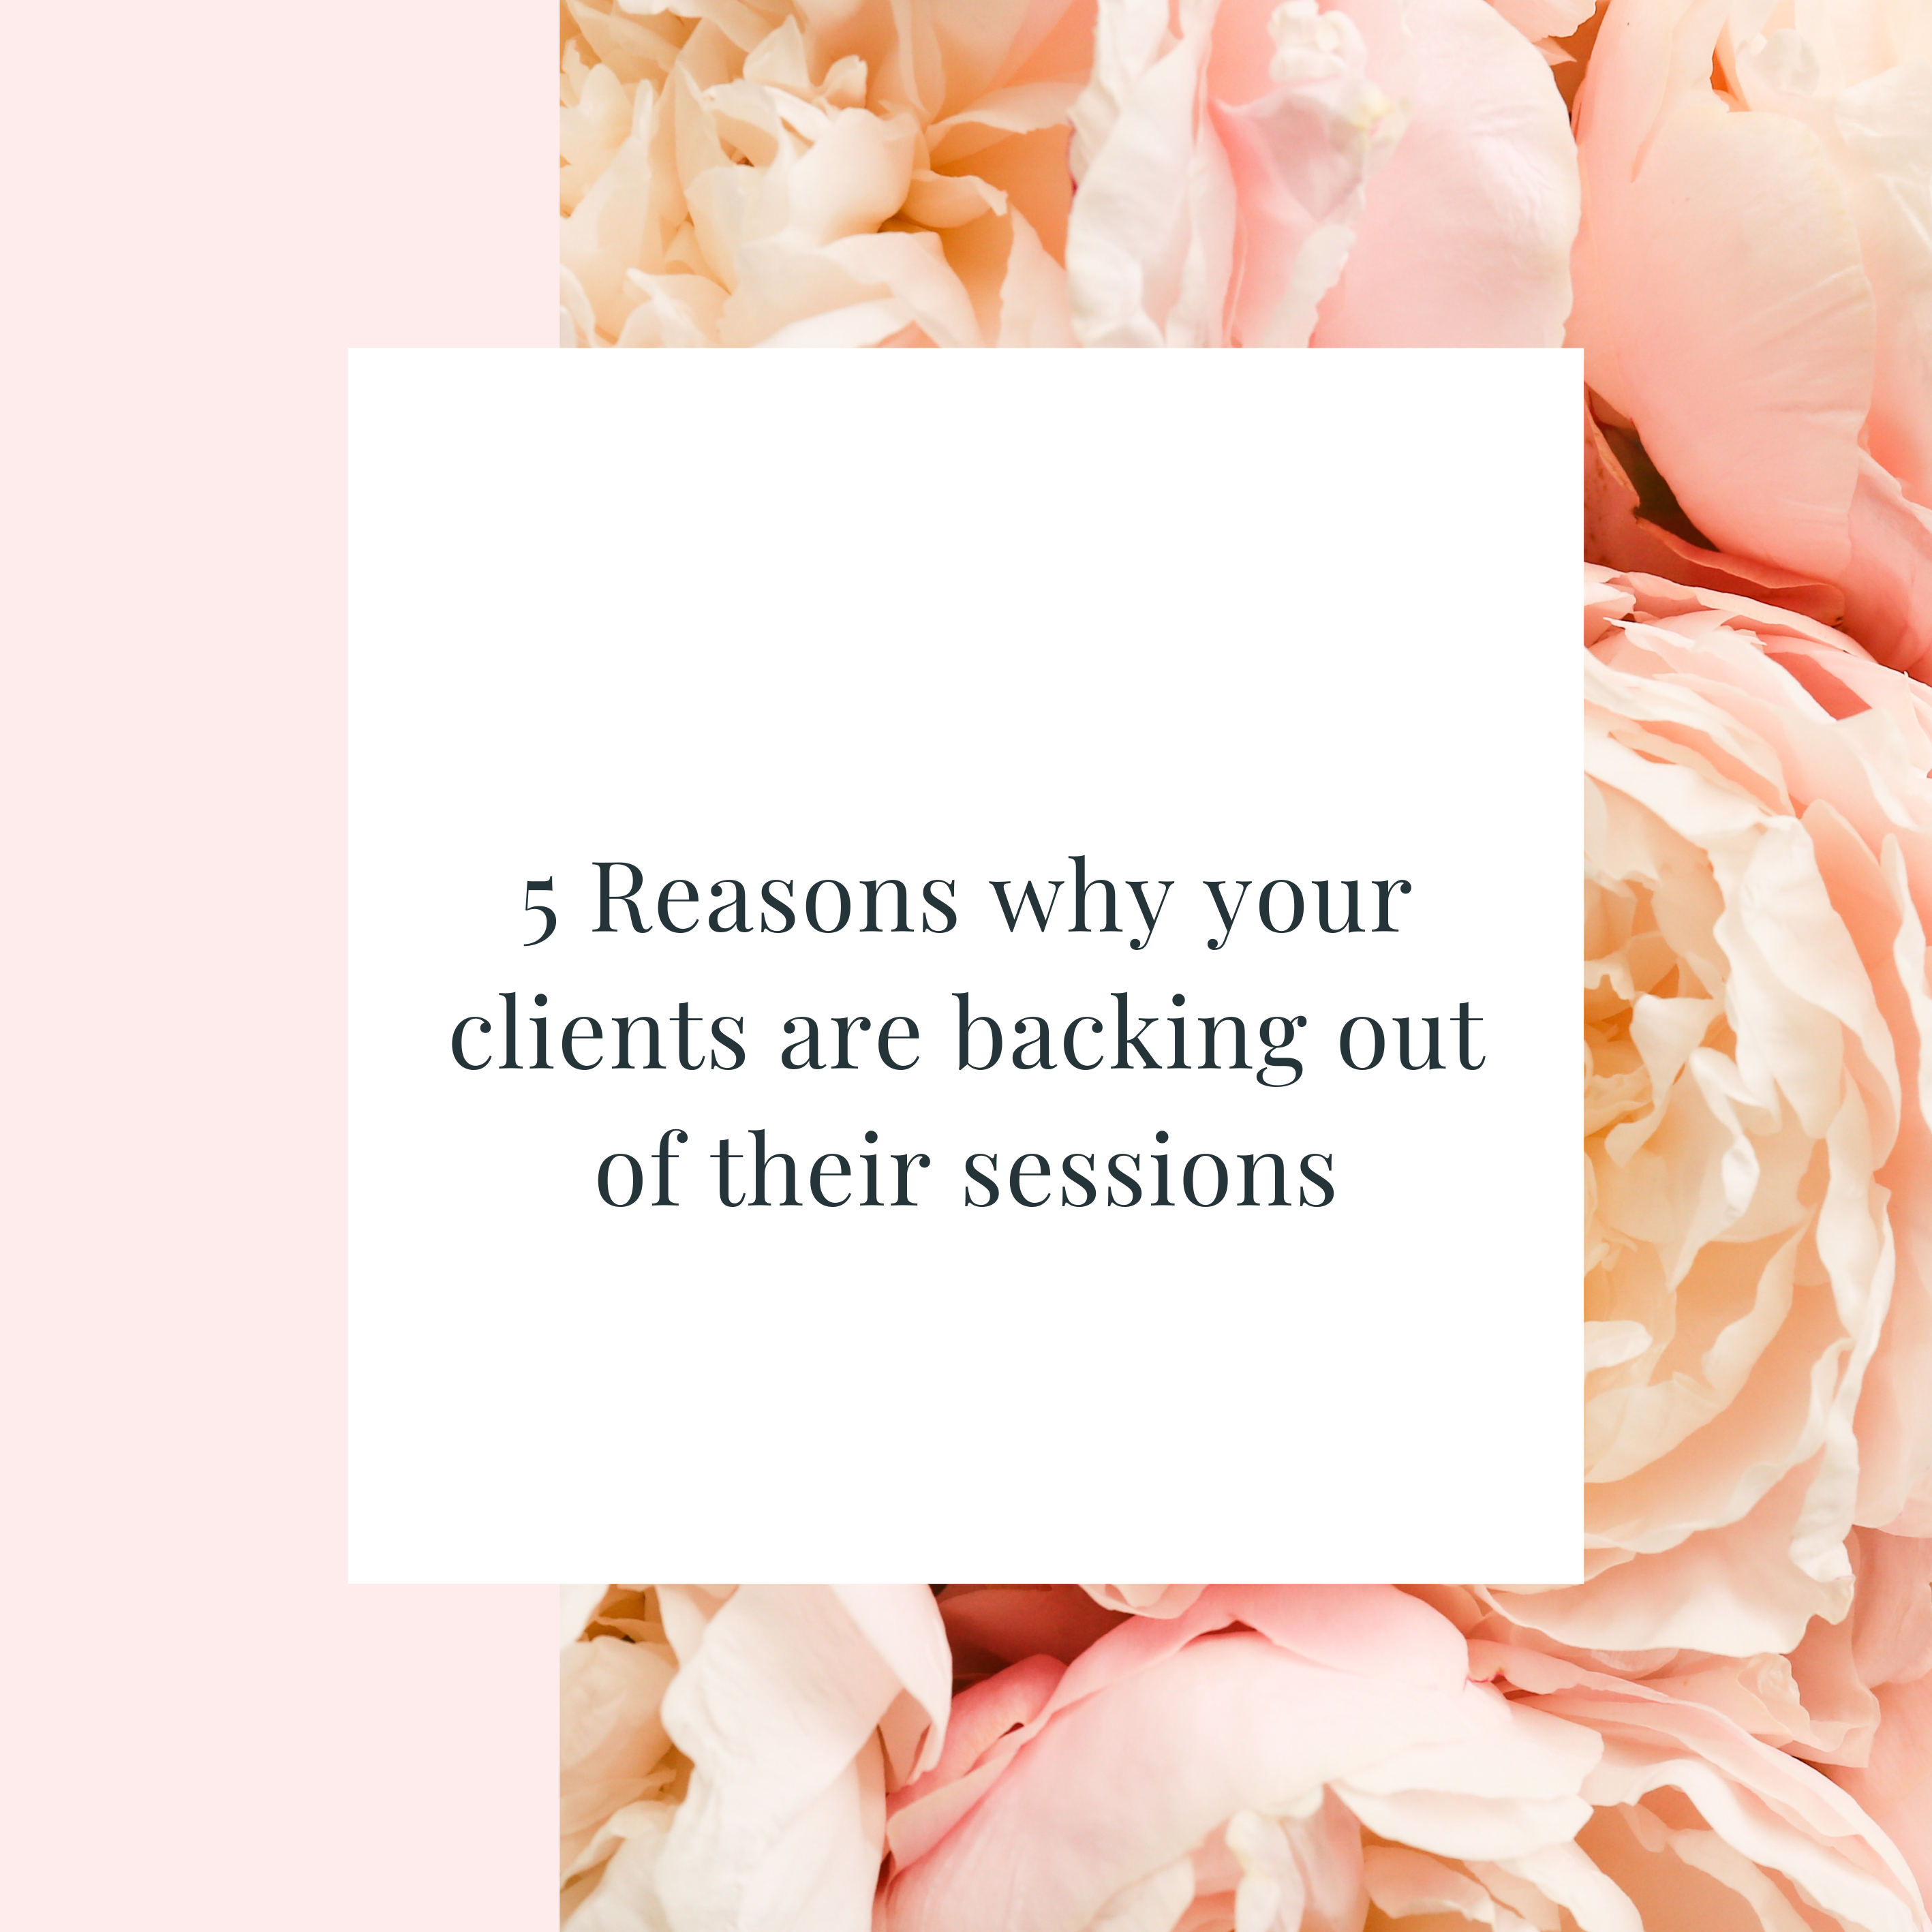 Discover the reasons clients reconsider sessions. From contracts to clear expectations, find the balance between warmth and professionalism. Dive into the insights now